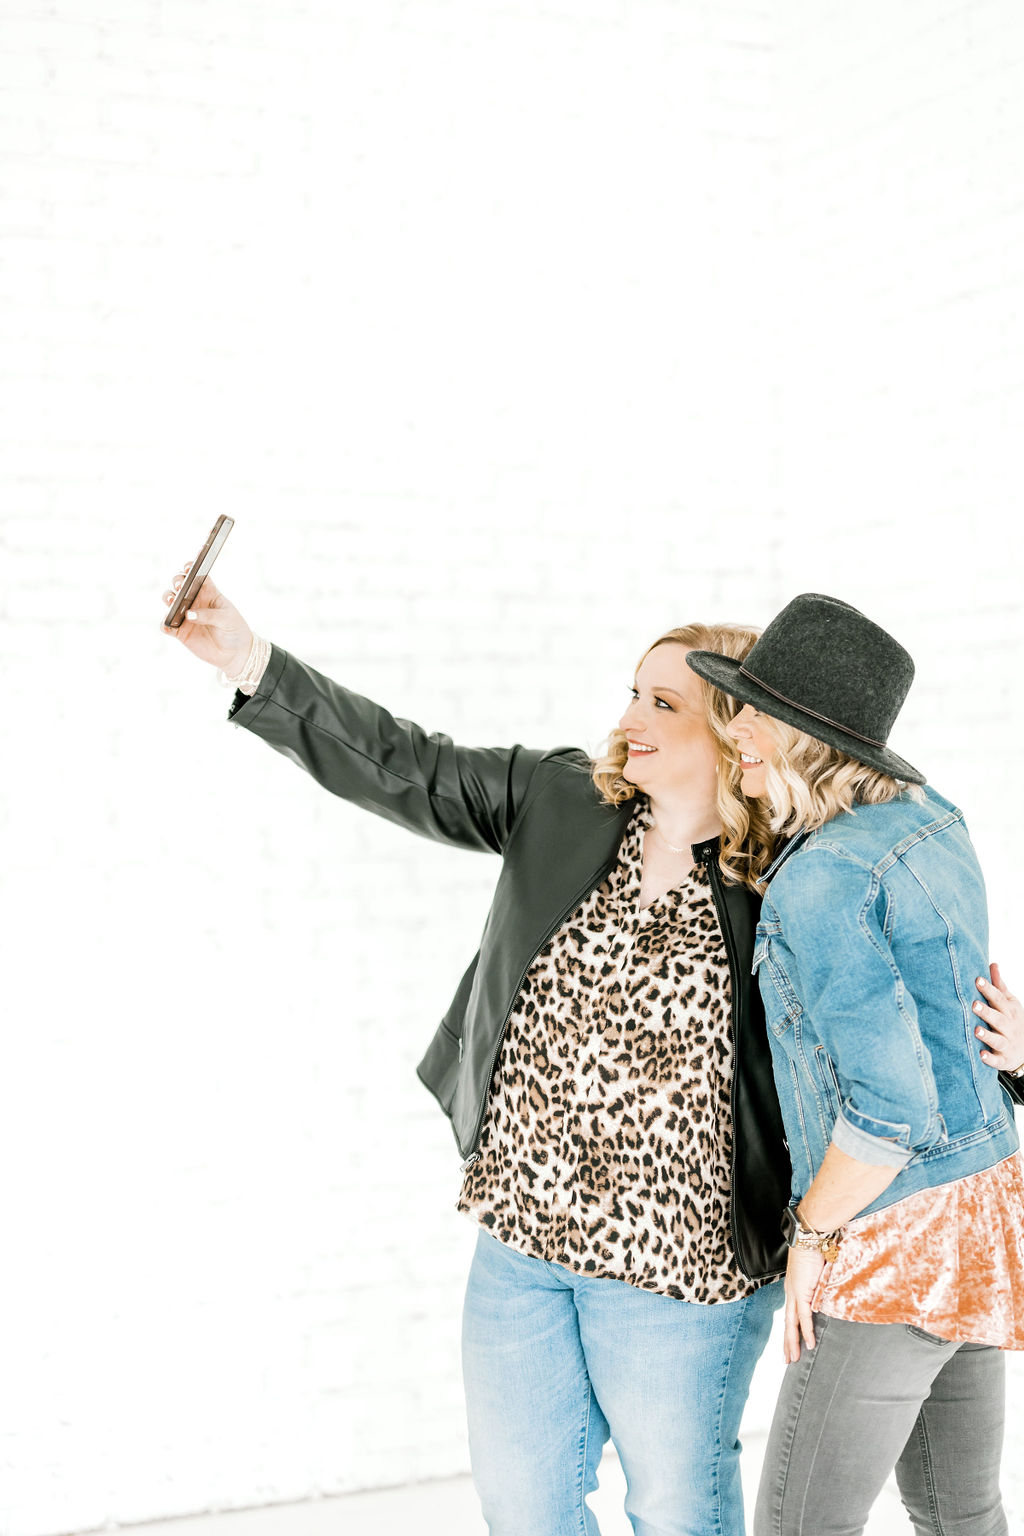 Two women taking a selfie together - one woman is wearing an animal print top, black leather jacket and jeans and the other woman is wearing a charcoal hat, denim jacket, orange top and grey jeans